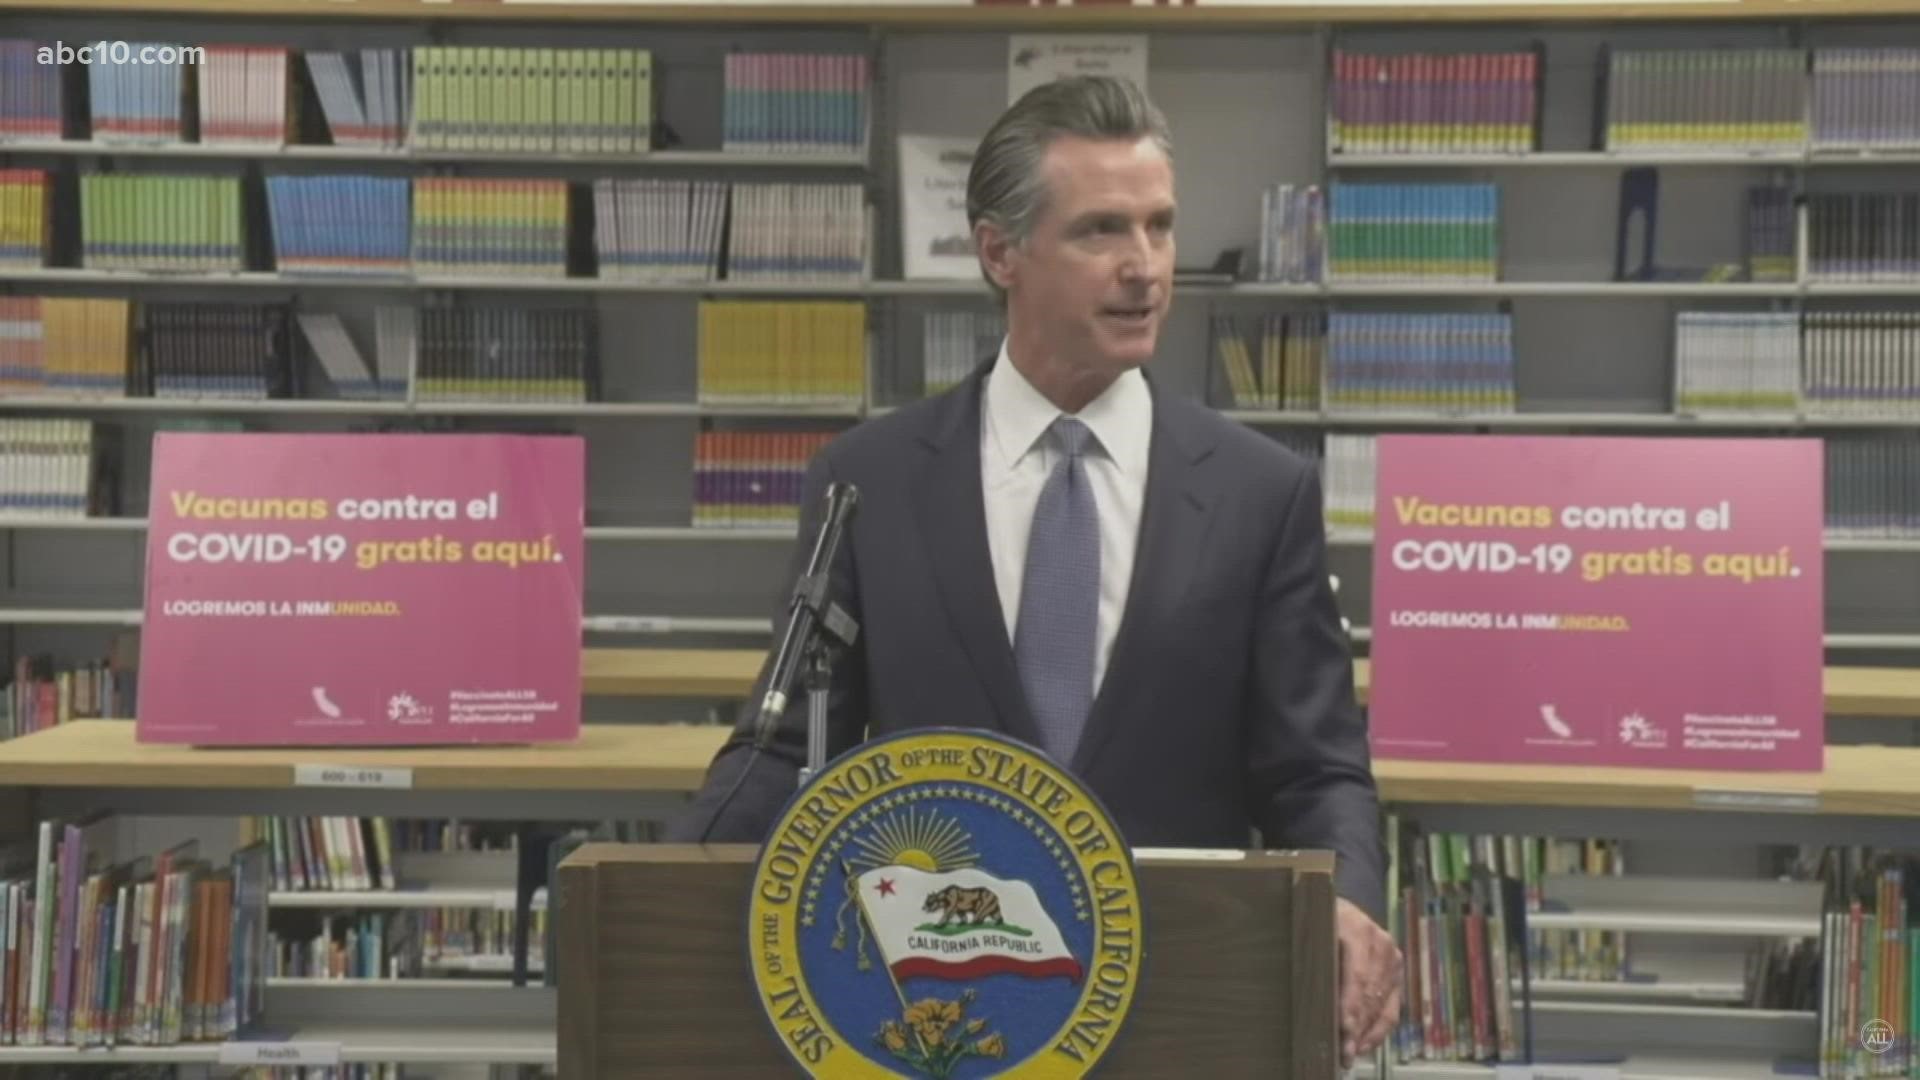 When asked if there could be another shutdown for schools and businesses in California, Gov. Newsom downplayed the possibility because of the omicron variant.